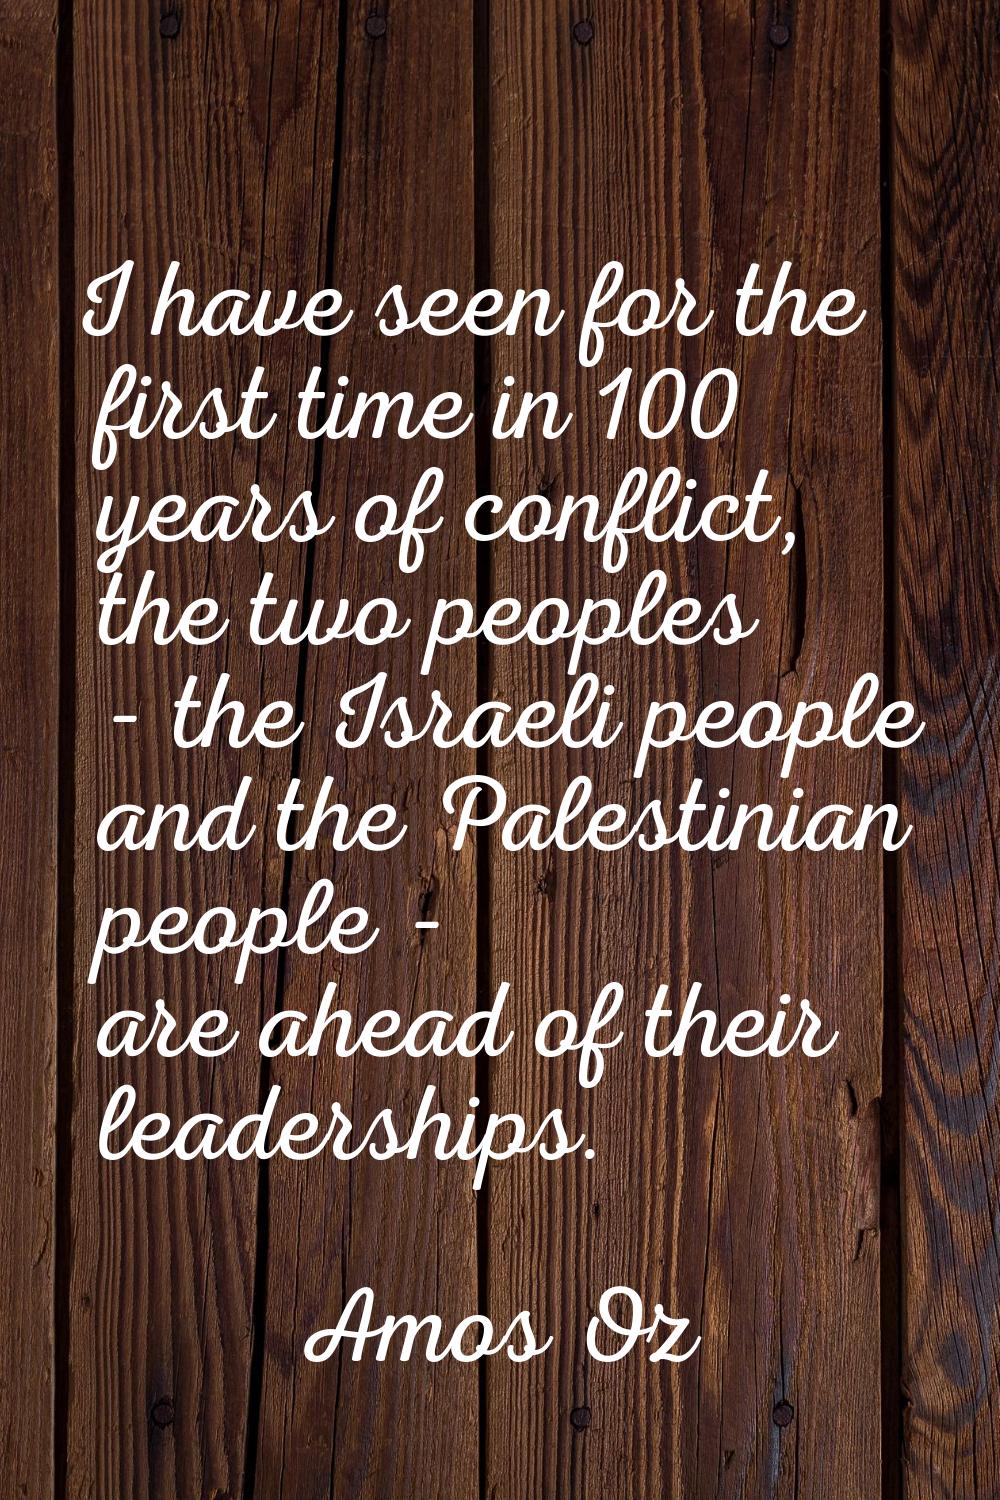 I have seen for the first time in 100 years of conflict, the two peoples - the Israeli people and t